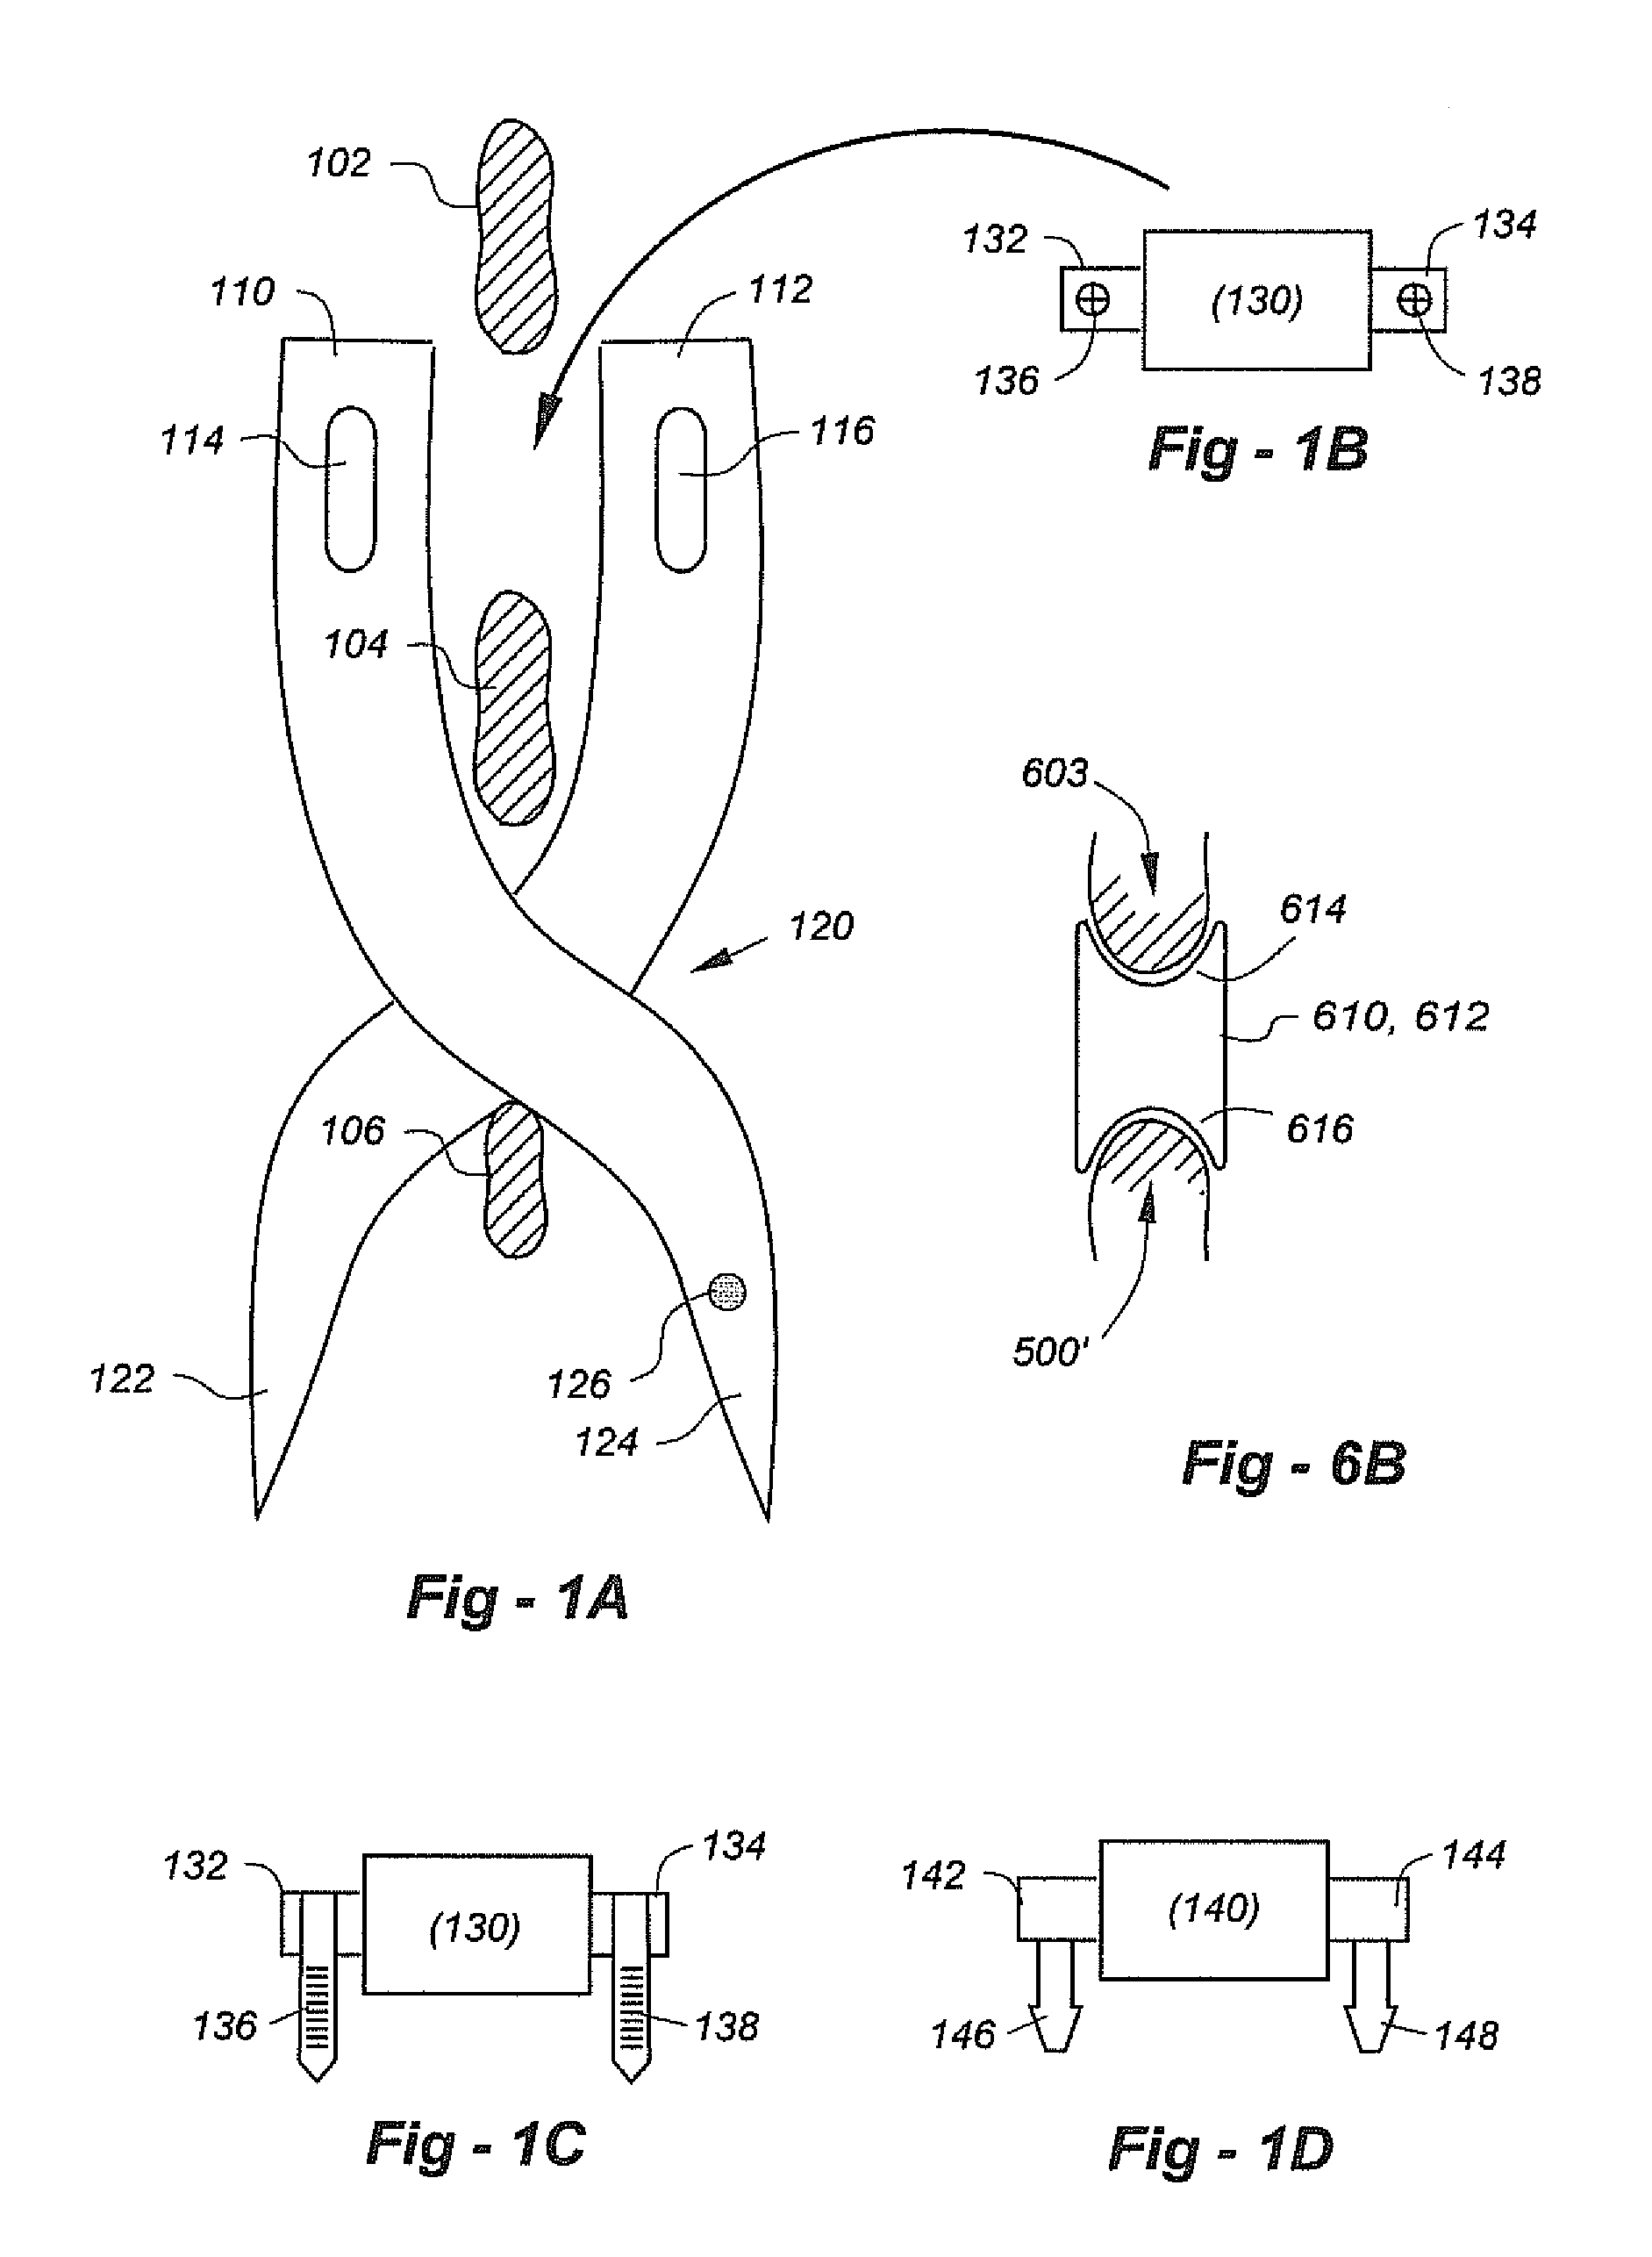 Pedicle and non-pedicle based interspinous and lateral spacers